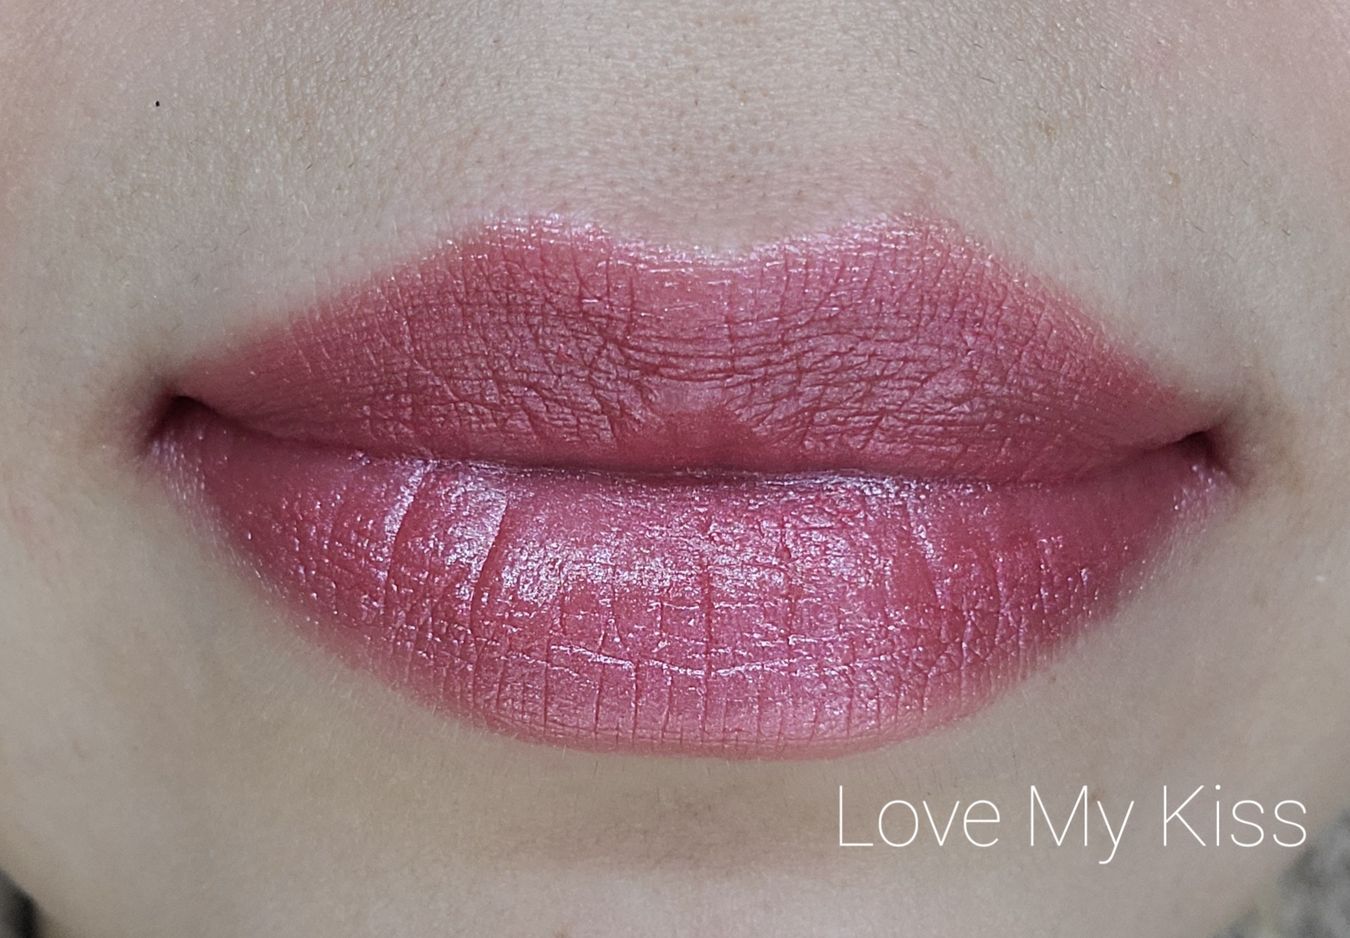 Image of close up lips wearing the lipstick in the shade called Love My Kiss. Pink red shade with subtle shimmer.